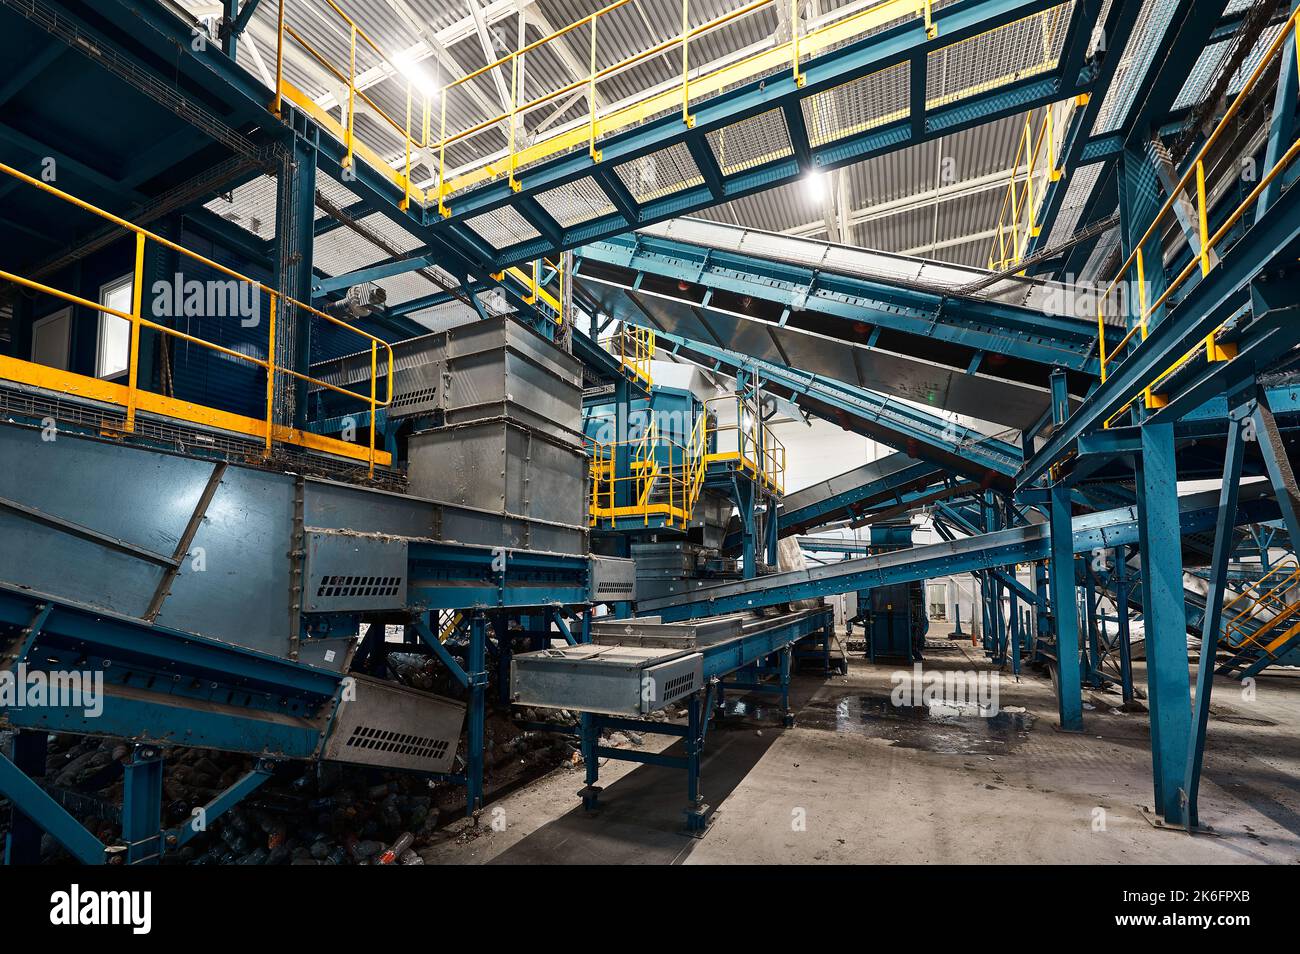 Large production line with conveyors carrying trash at plant Stock Photo